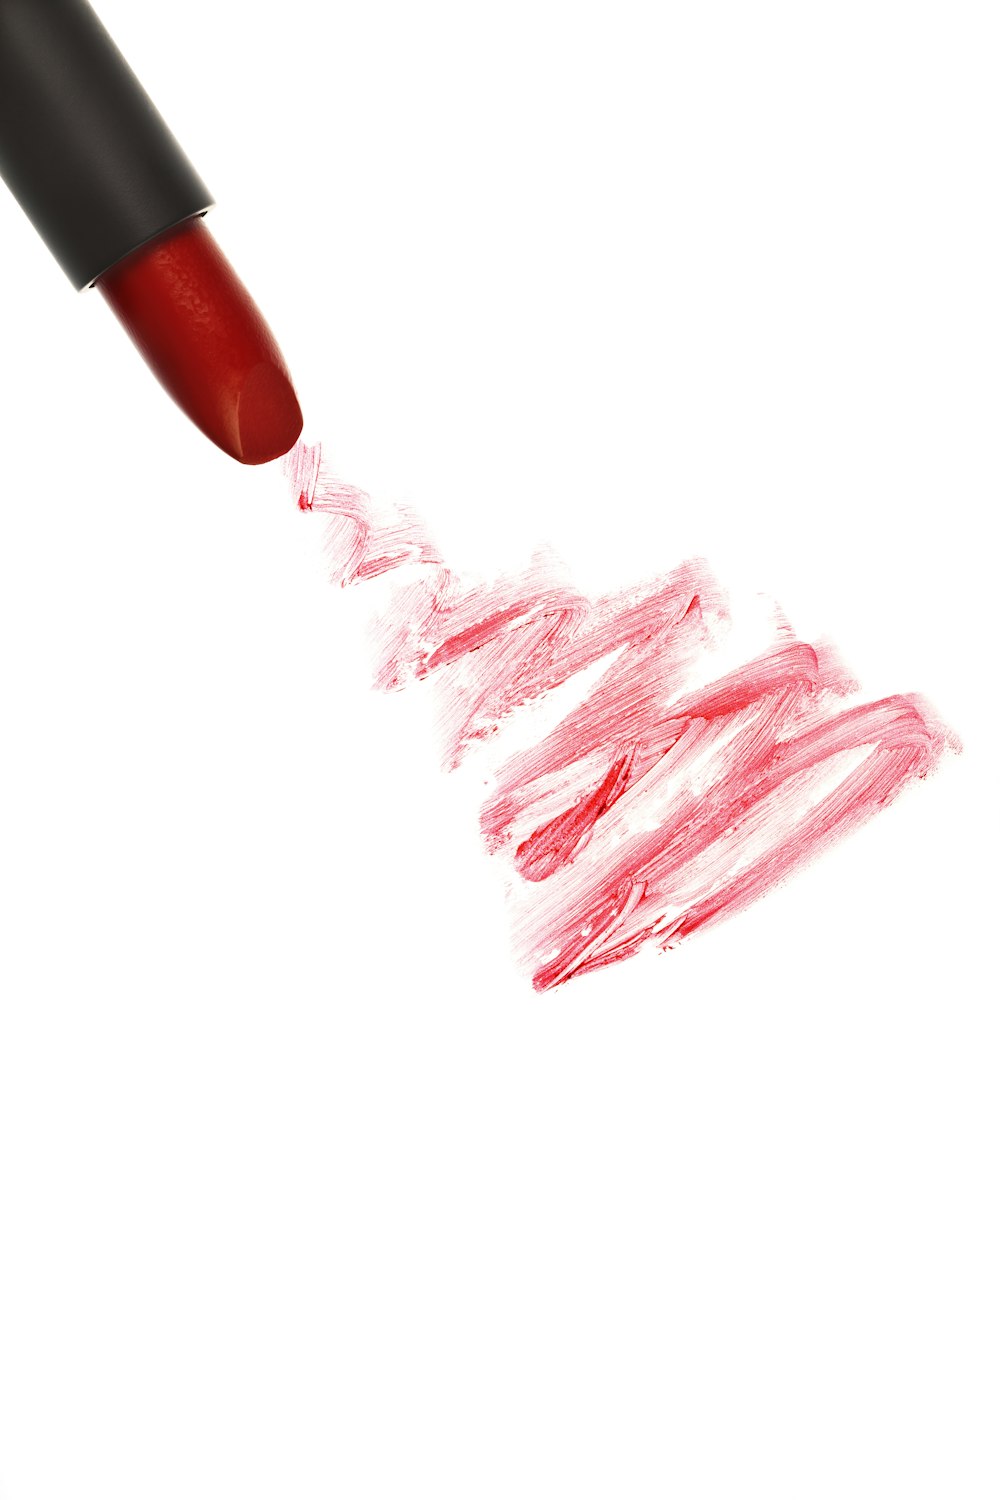 a close up of a red lipstick on a white background